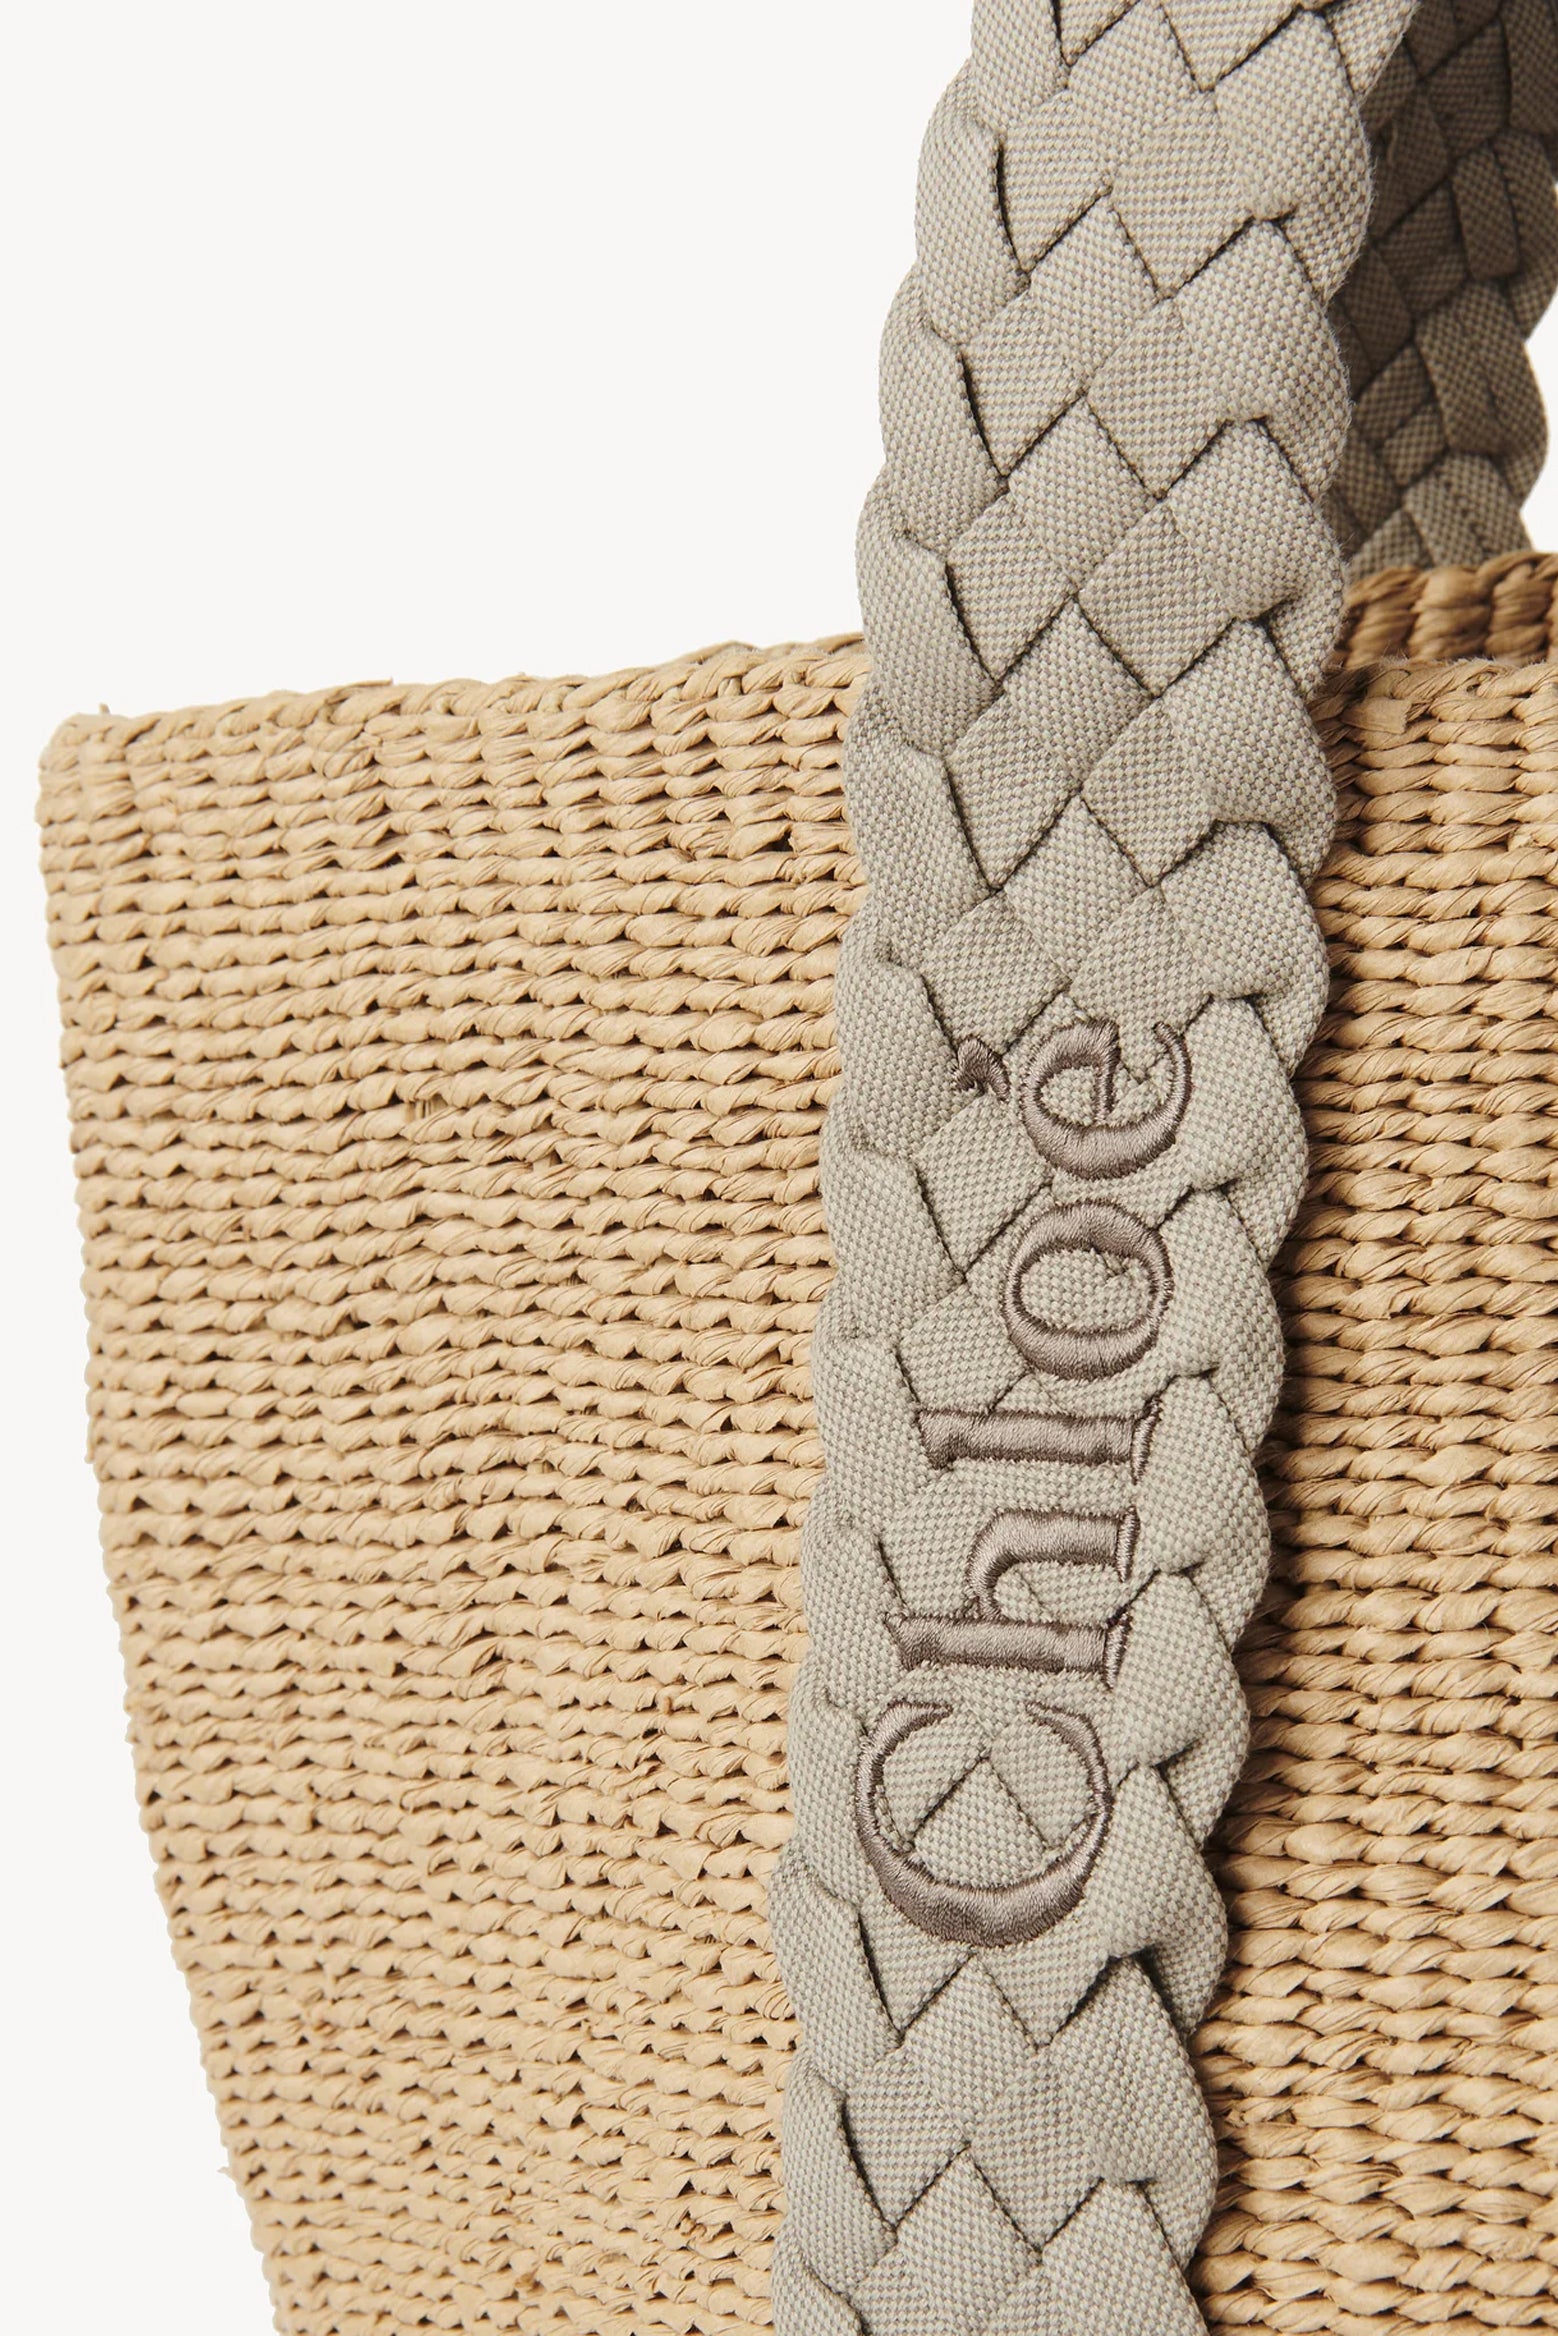 Chloe Woody Large Basket Bag in Pastel Grey available at The New Trend Australia.